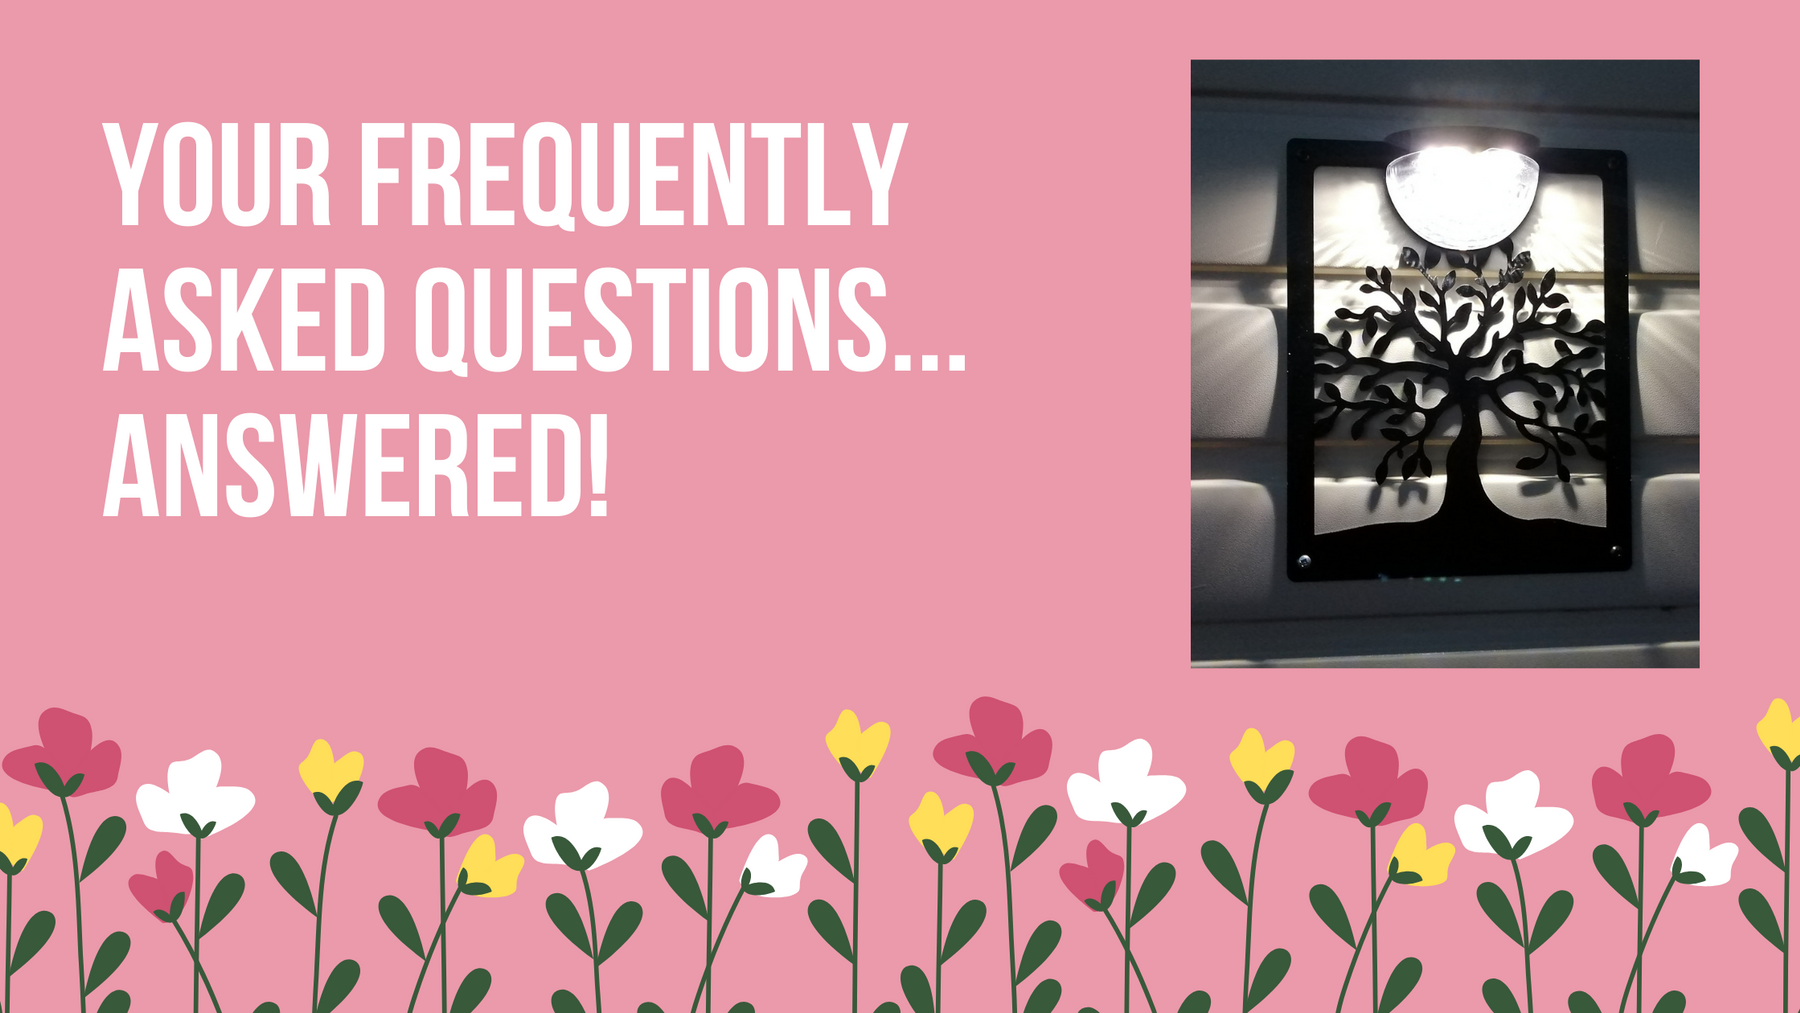 Your frequently asked questions about our solar lights answered!